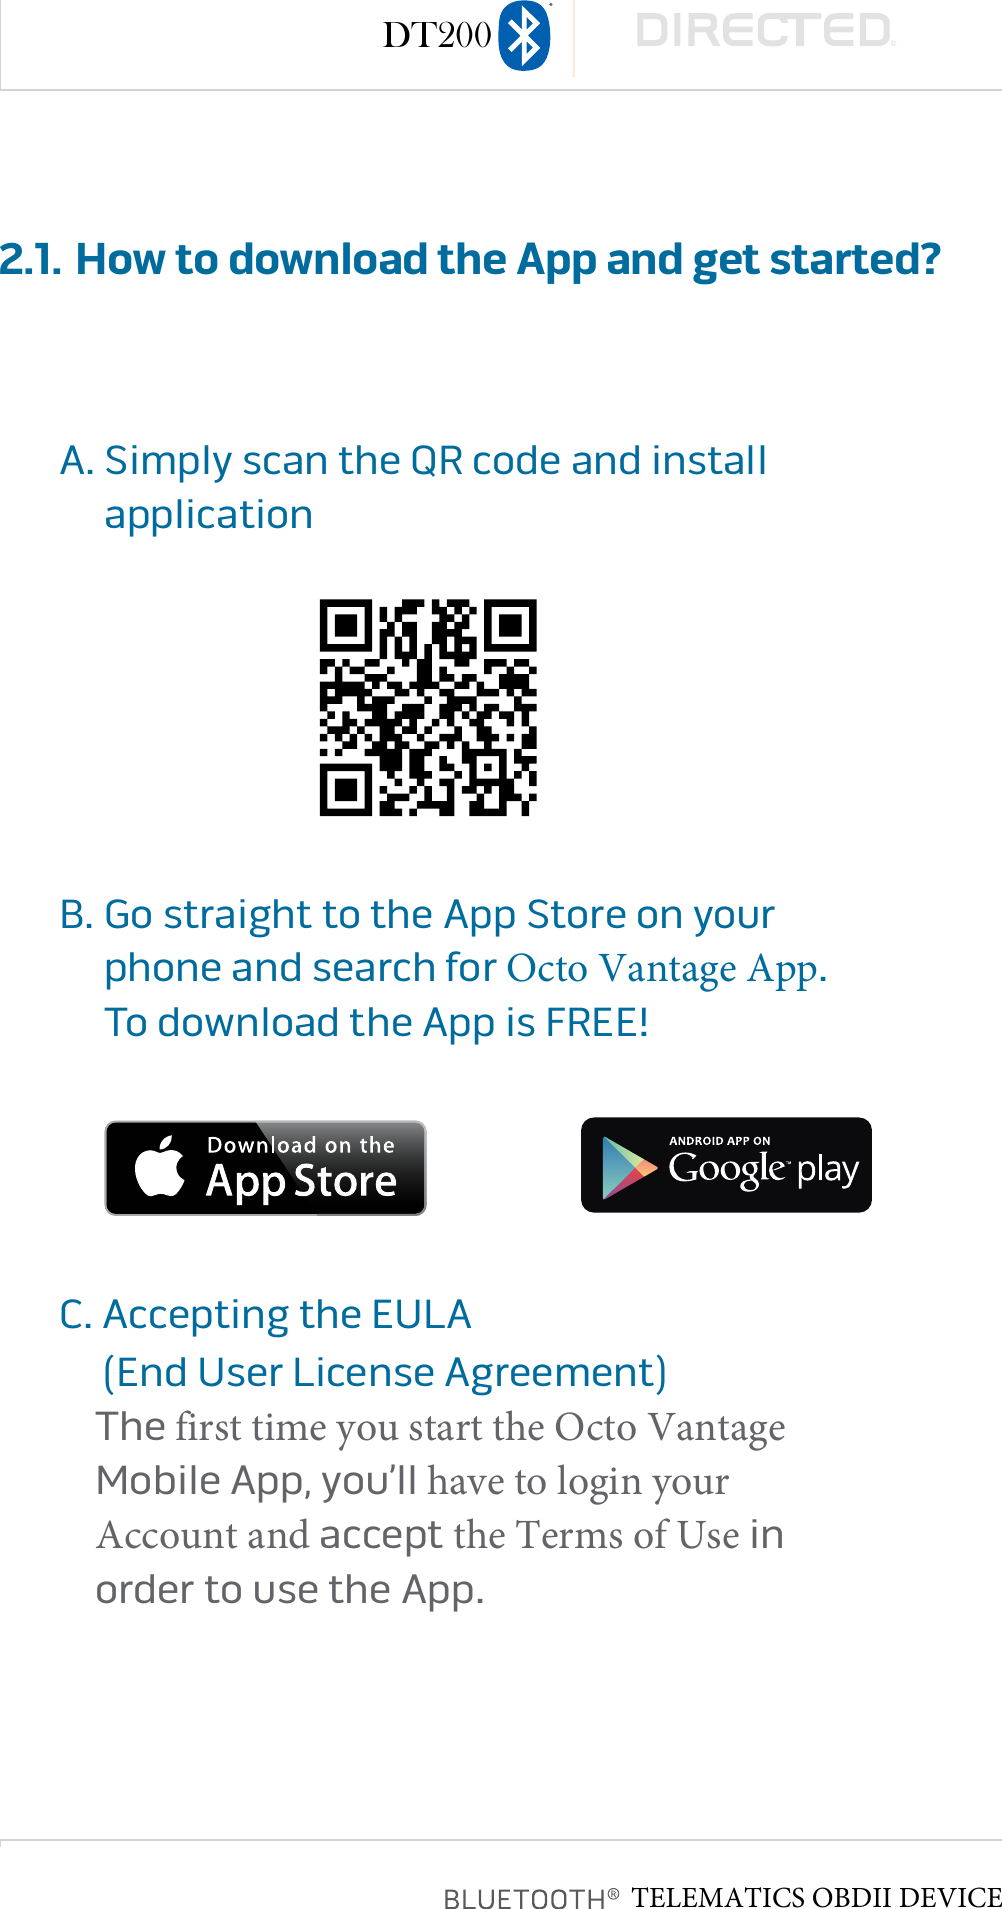 page 92.1. How to download the App and get started?A�  Simply scan the QR code and installapplicationB�  Go straight to the App Store on yourphone and search for Octo Vantage App�To download the App is FREE!C�  Accepting the EULA(End User License Agreement)The first time you start the Octo VantageMobile App, you’ll have to login your Account and accept the Terms of Use inorder to use the App�TELEMATICS OBDII DEVICEDT200